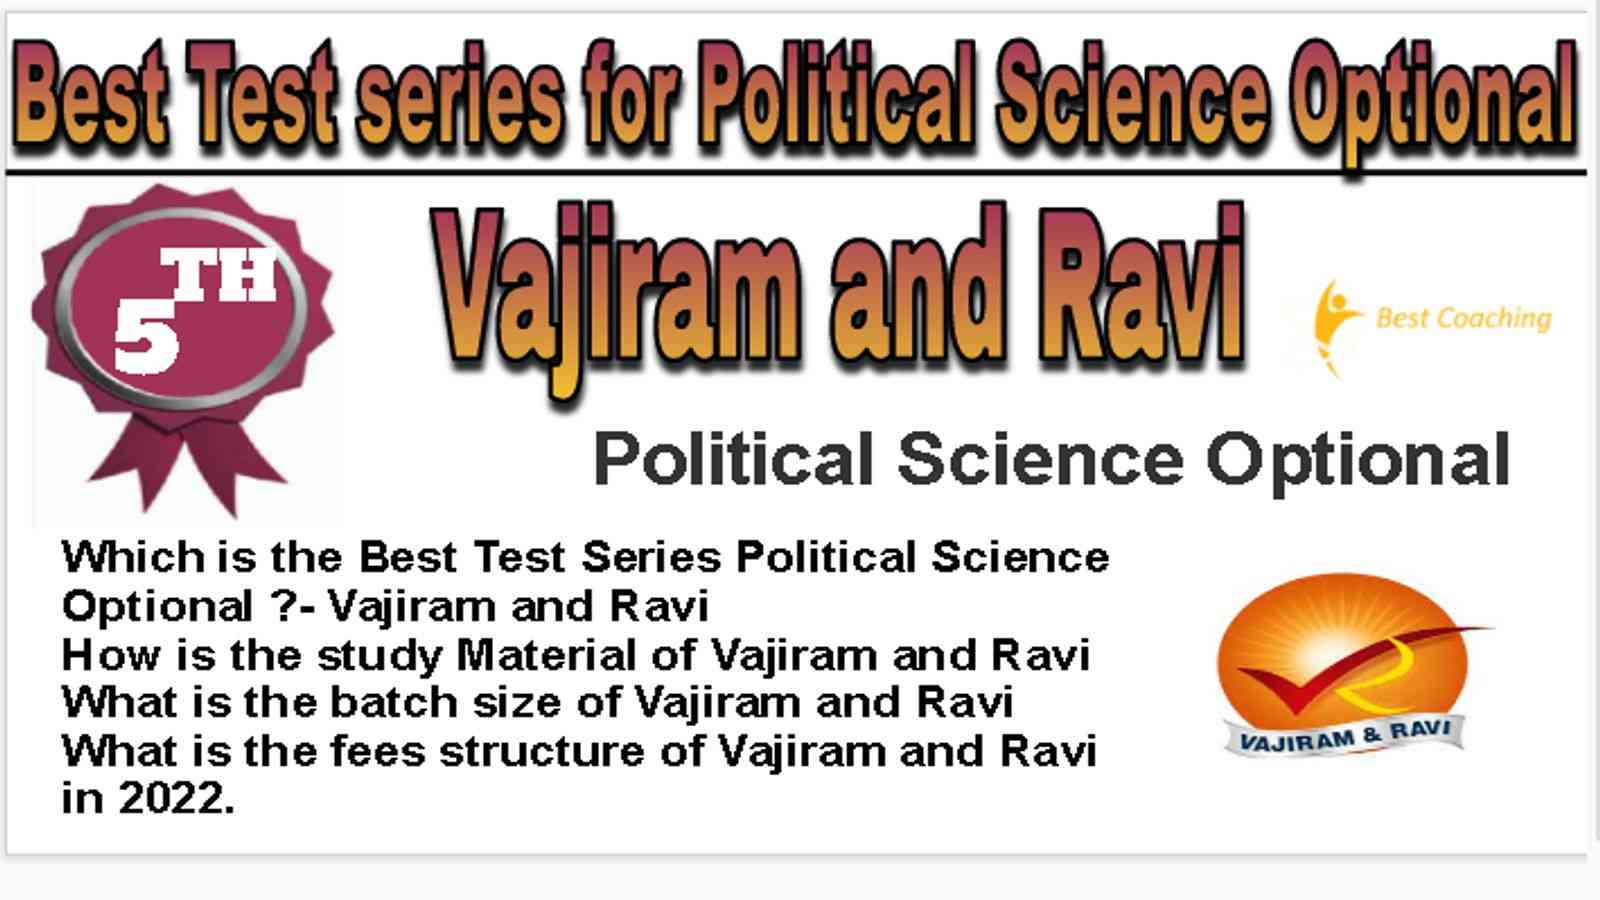 Rank 5 Best Test series for Political Science Optional